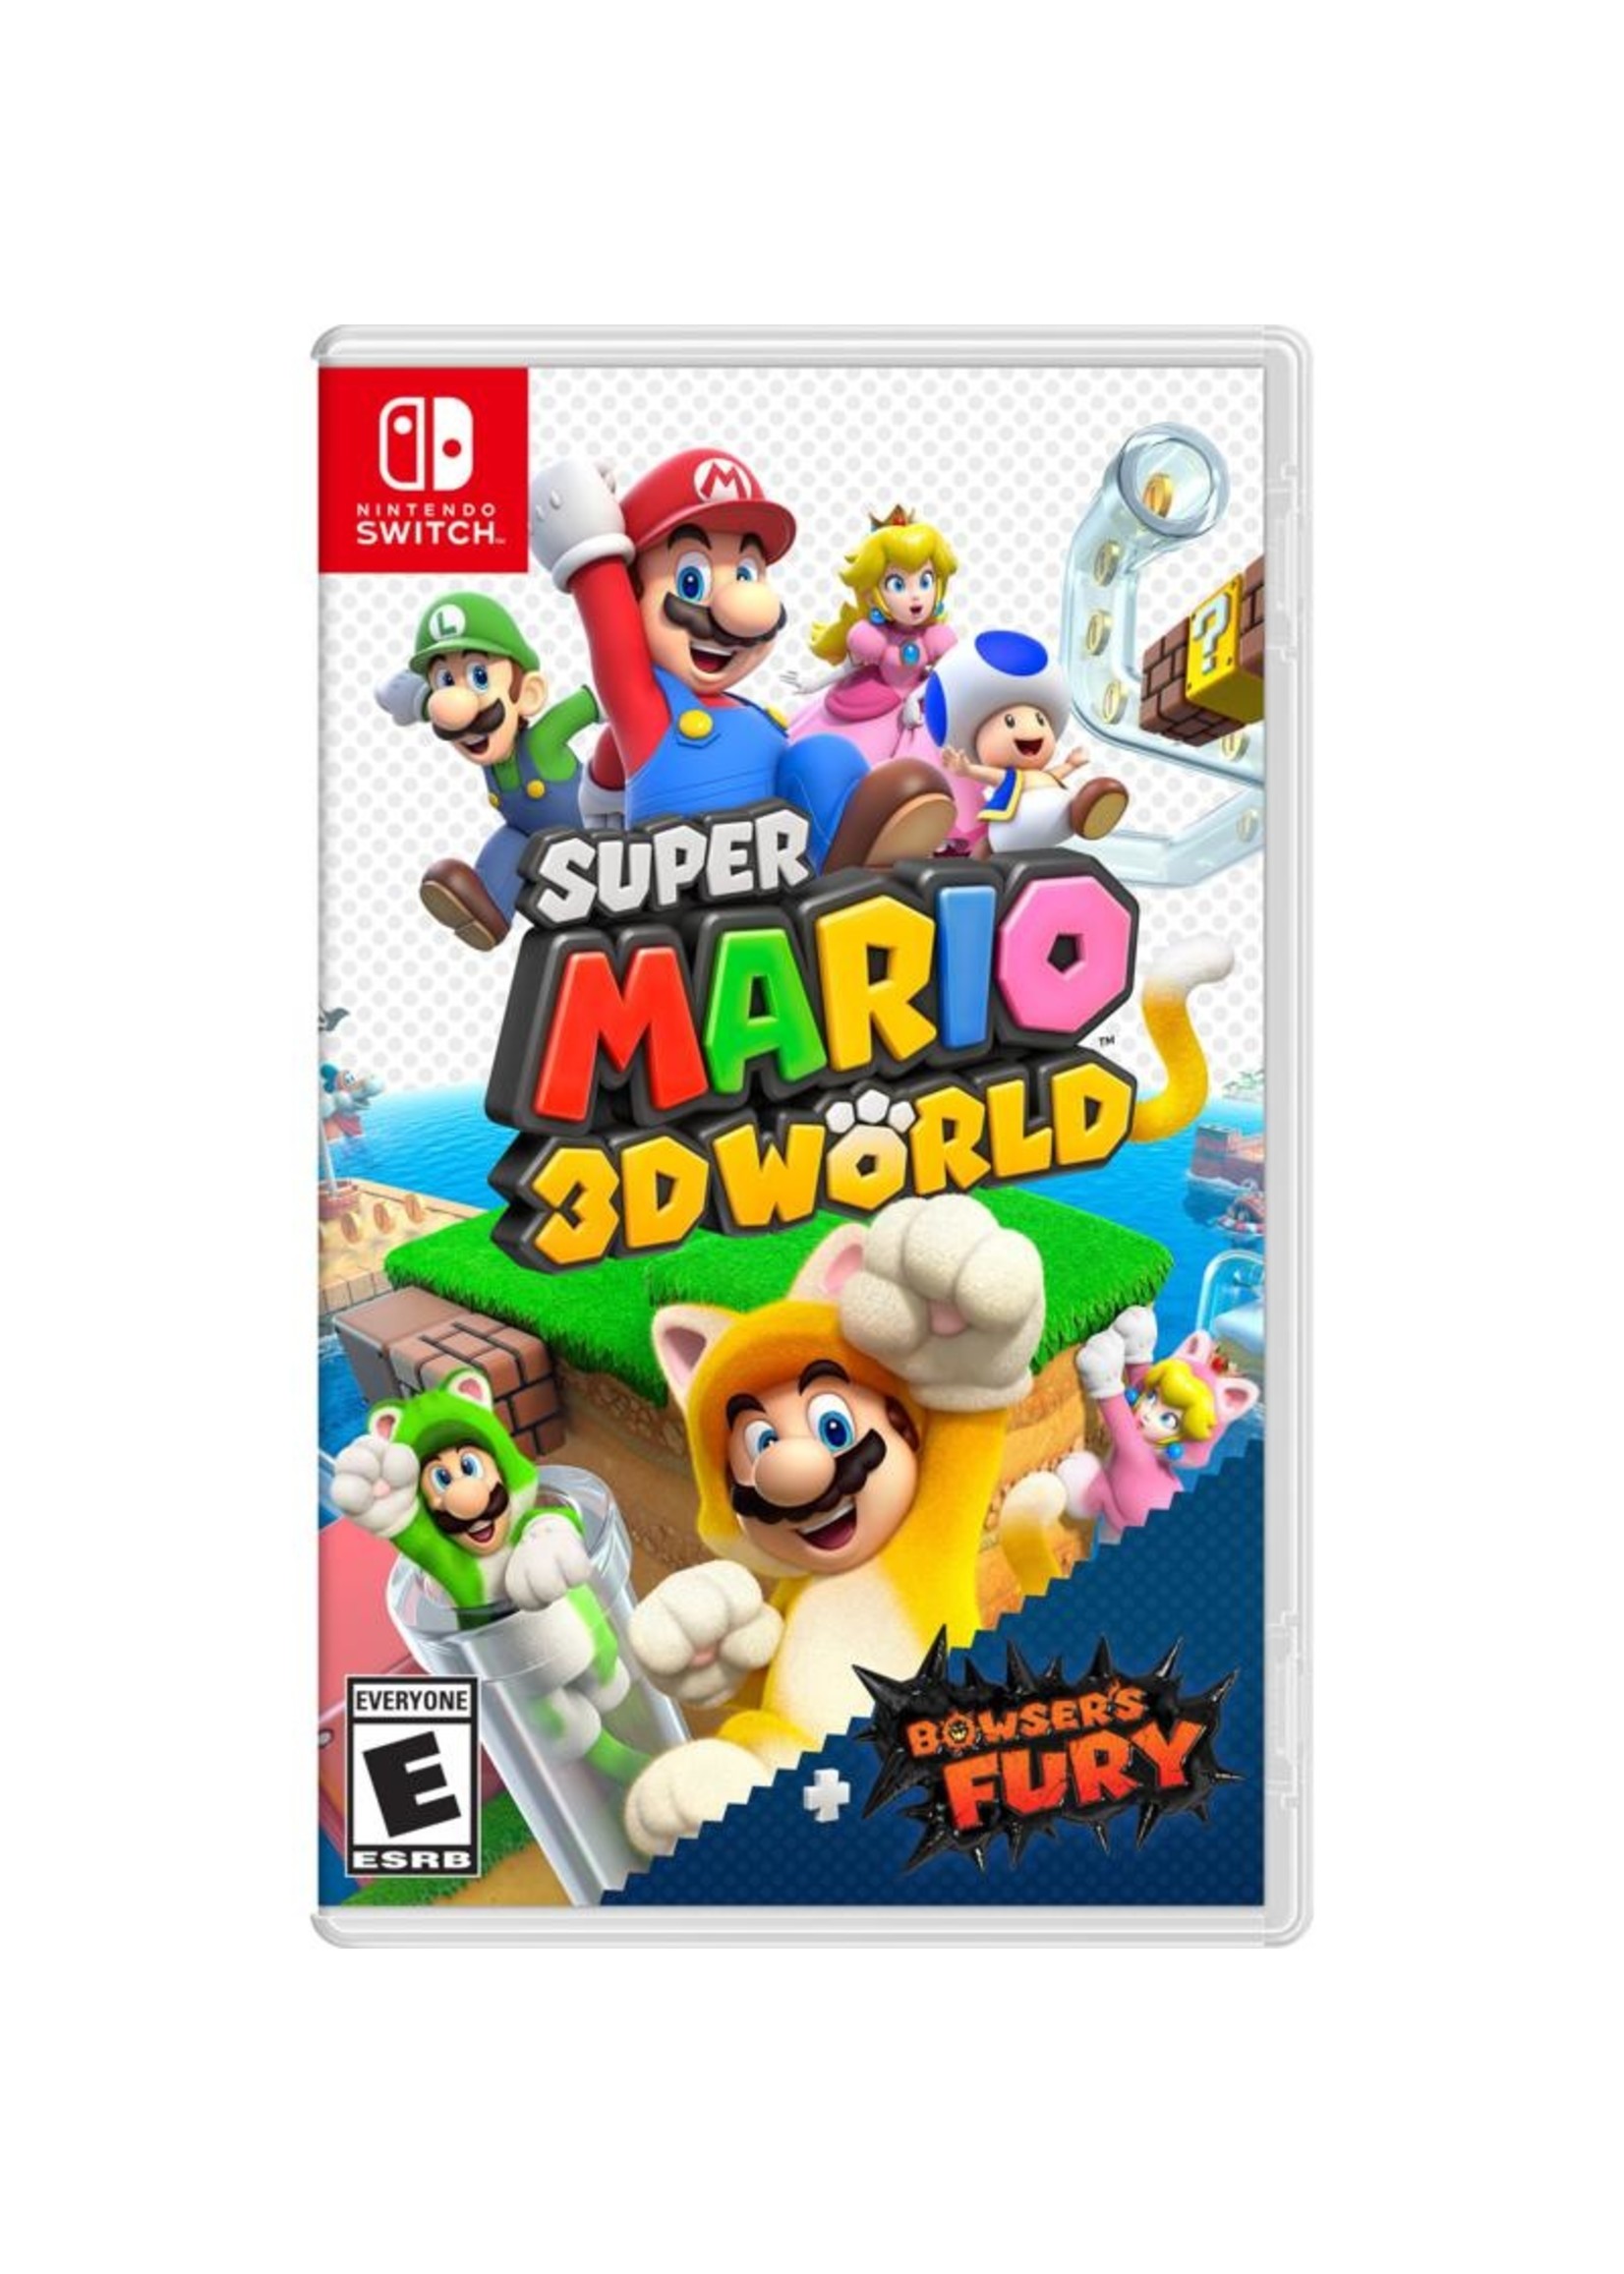 Super Mario 3D World + Browser's Fury - SWITCH NEW